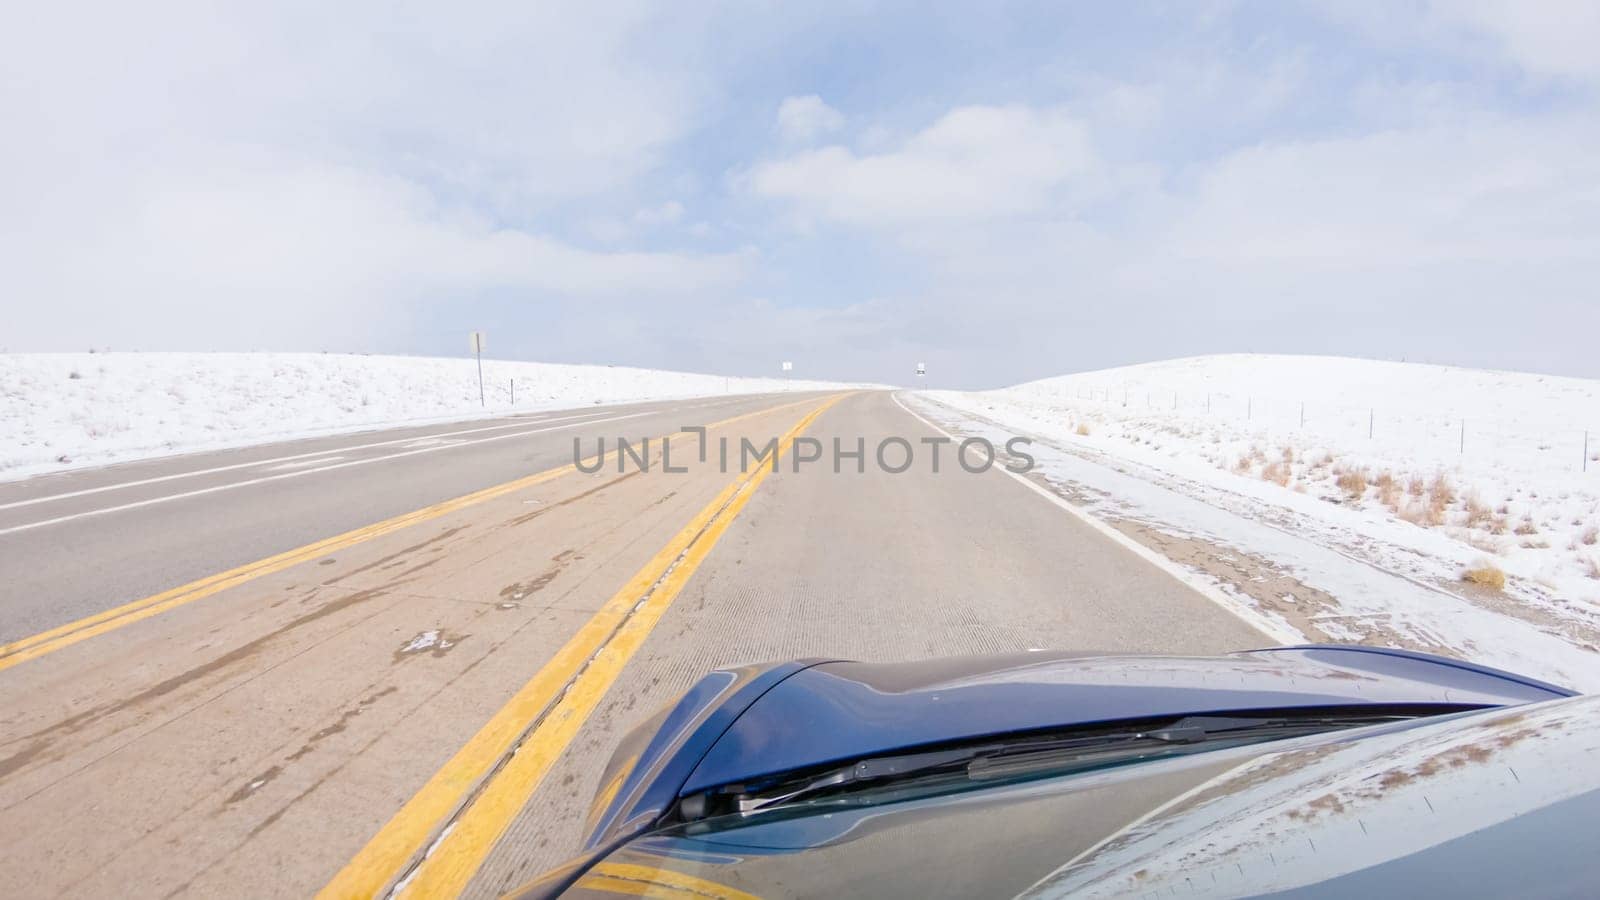 Navigating a frontage road post-winter storm offers a serene drive. The surrounding landscape, blanketed in snow, contributes to the peaceful and picturesque environment, enhancing the driving experience.